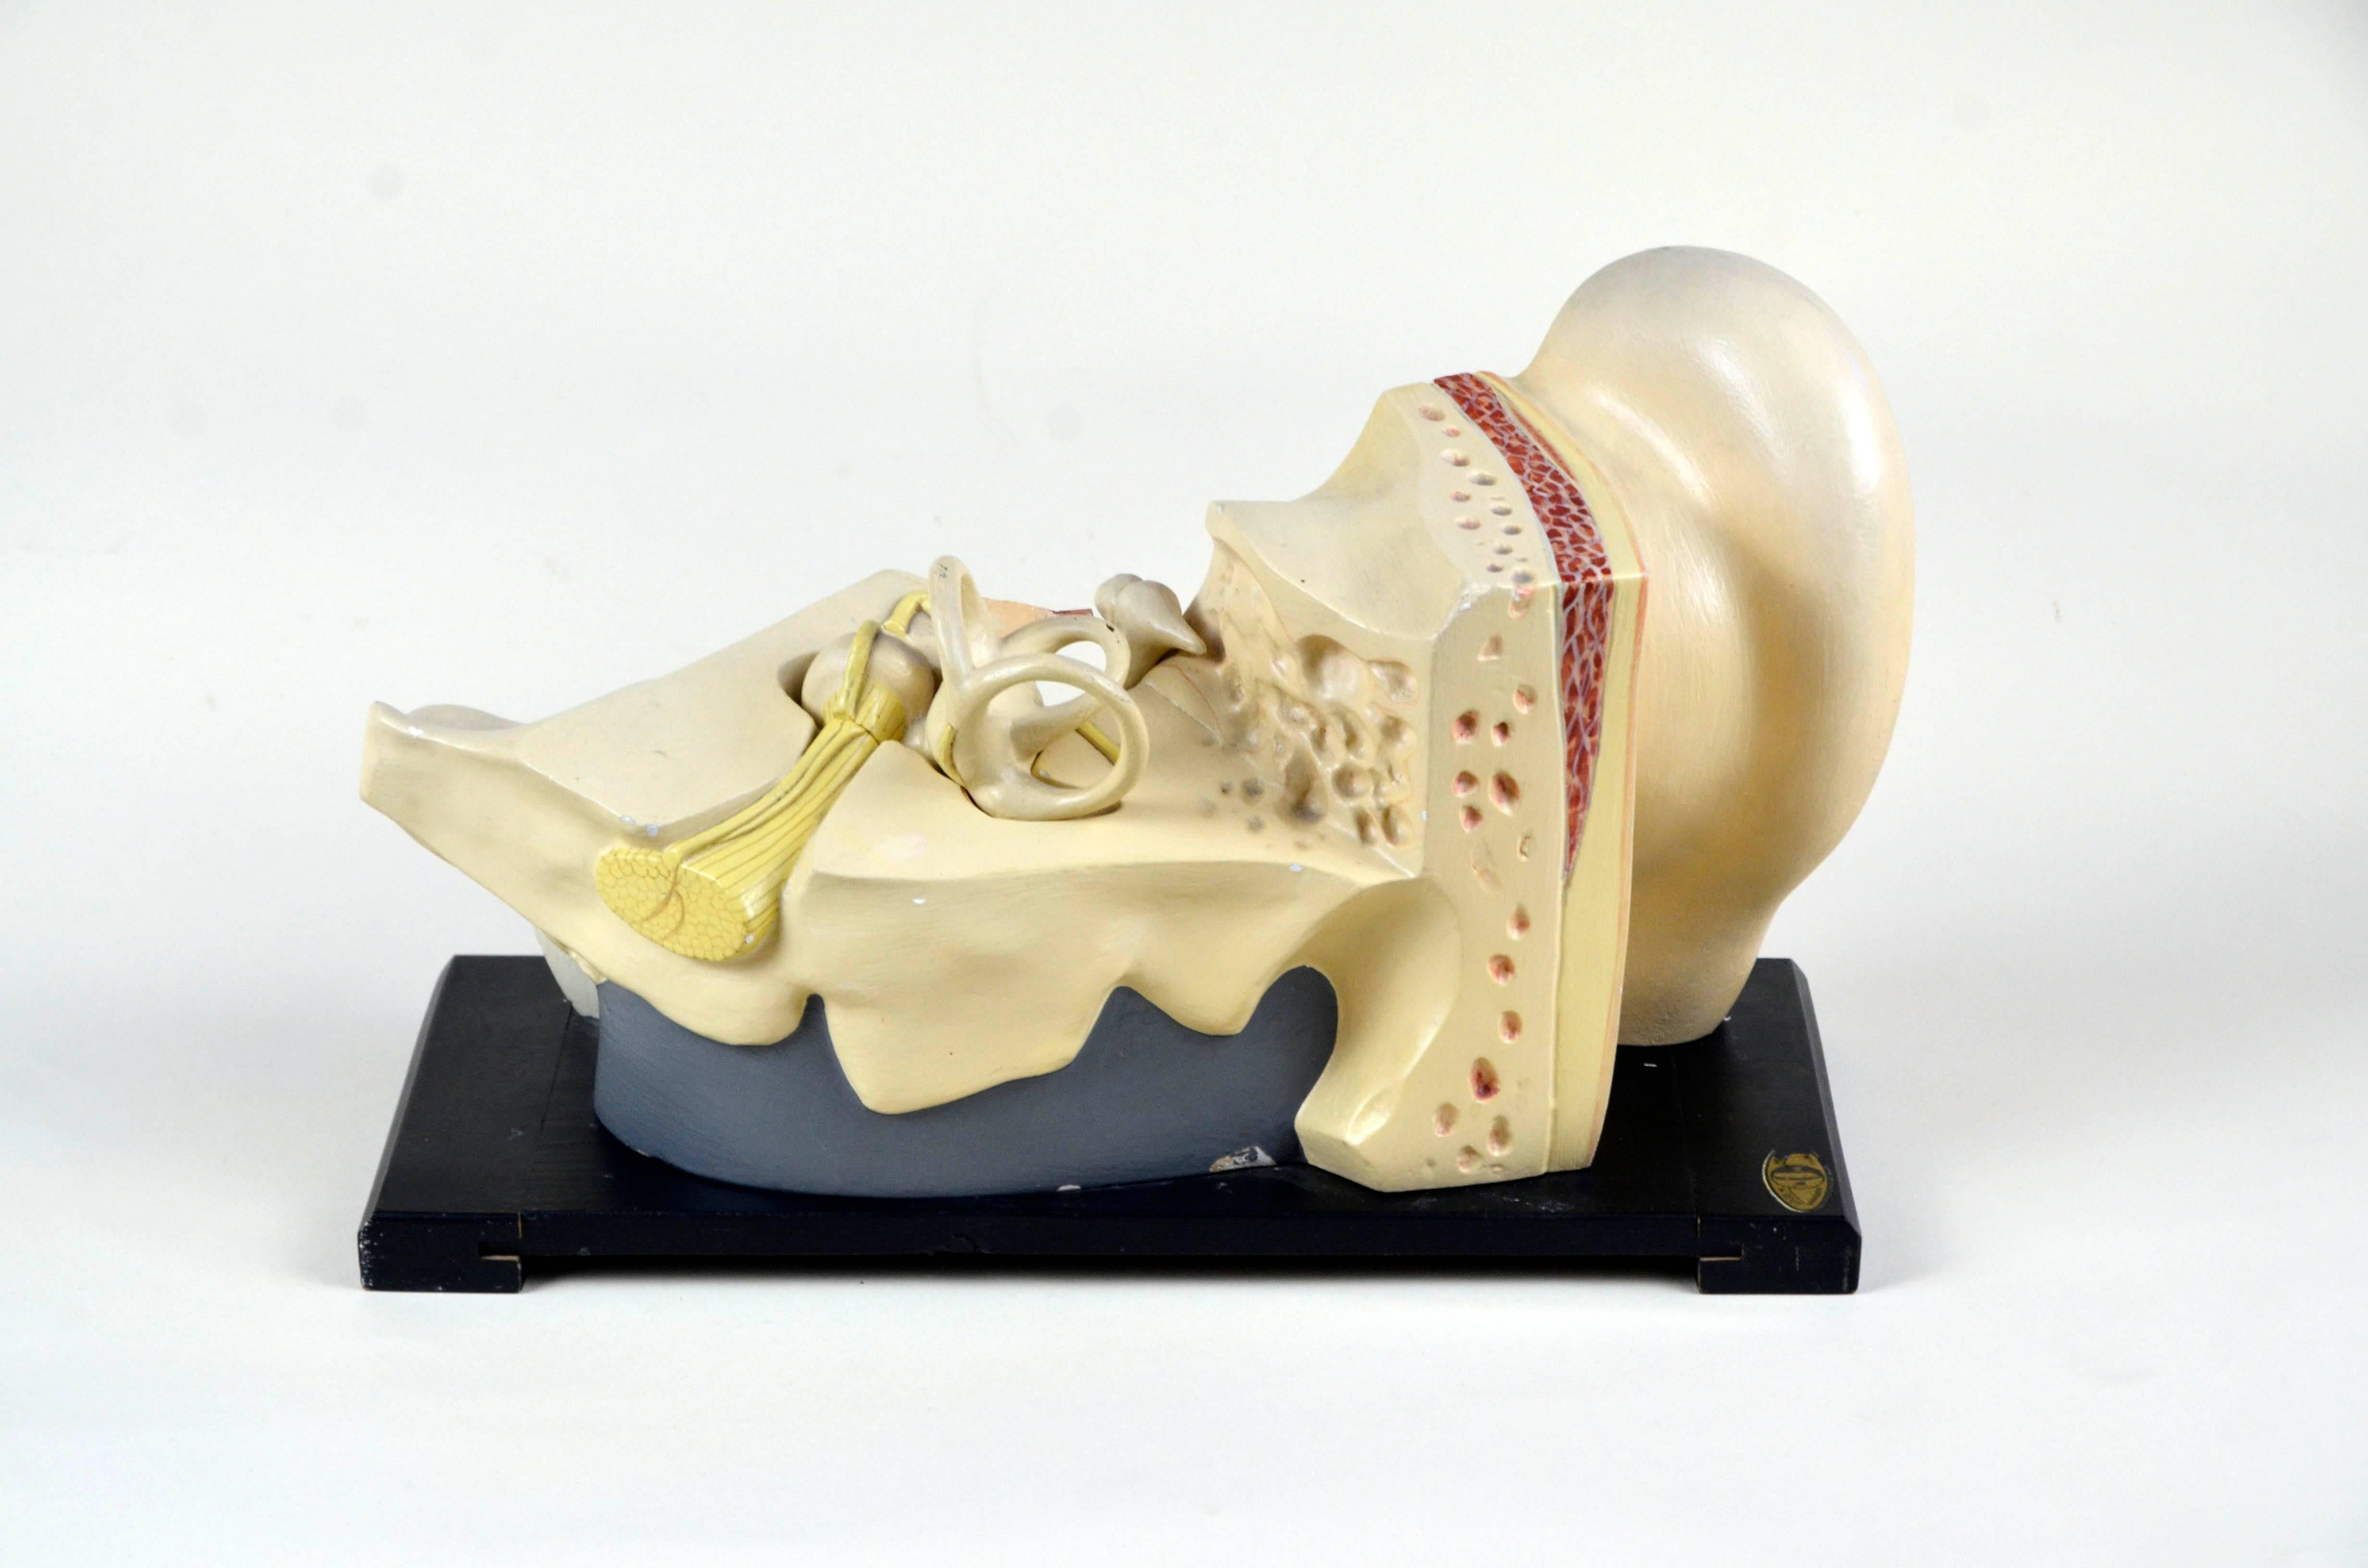 Mid-Century Modern 1930s Vintage Anatomical Ear Model in Plaster and Wood from Germany For Sale